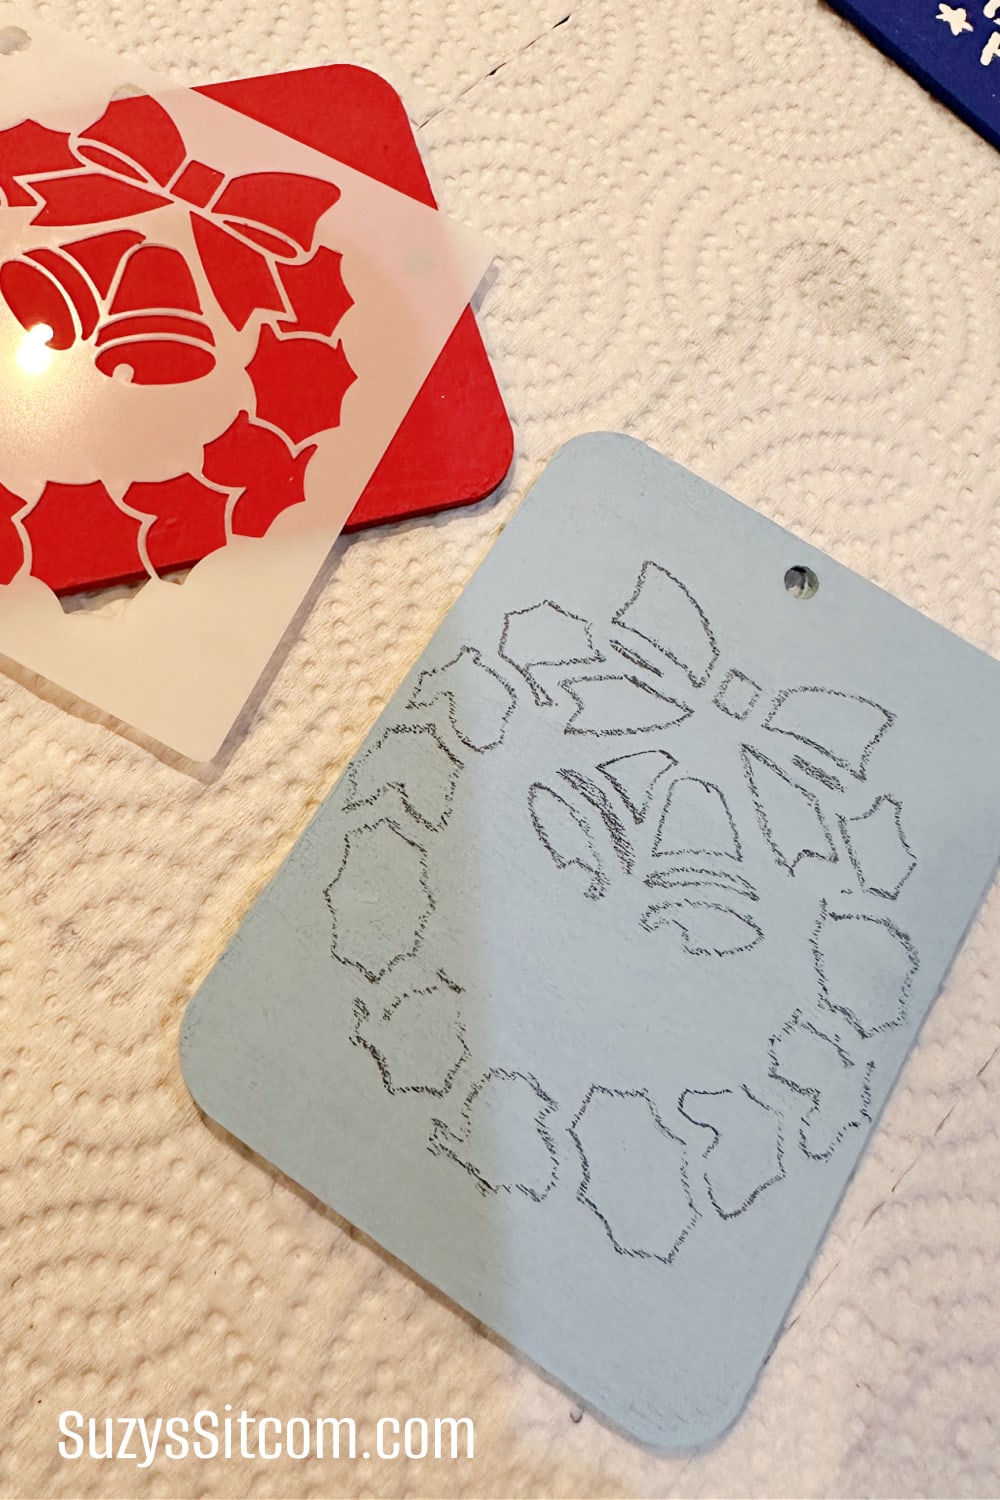 The traced design on the wooden gift tag.